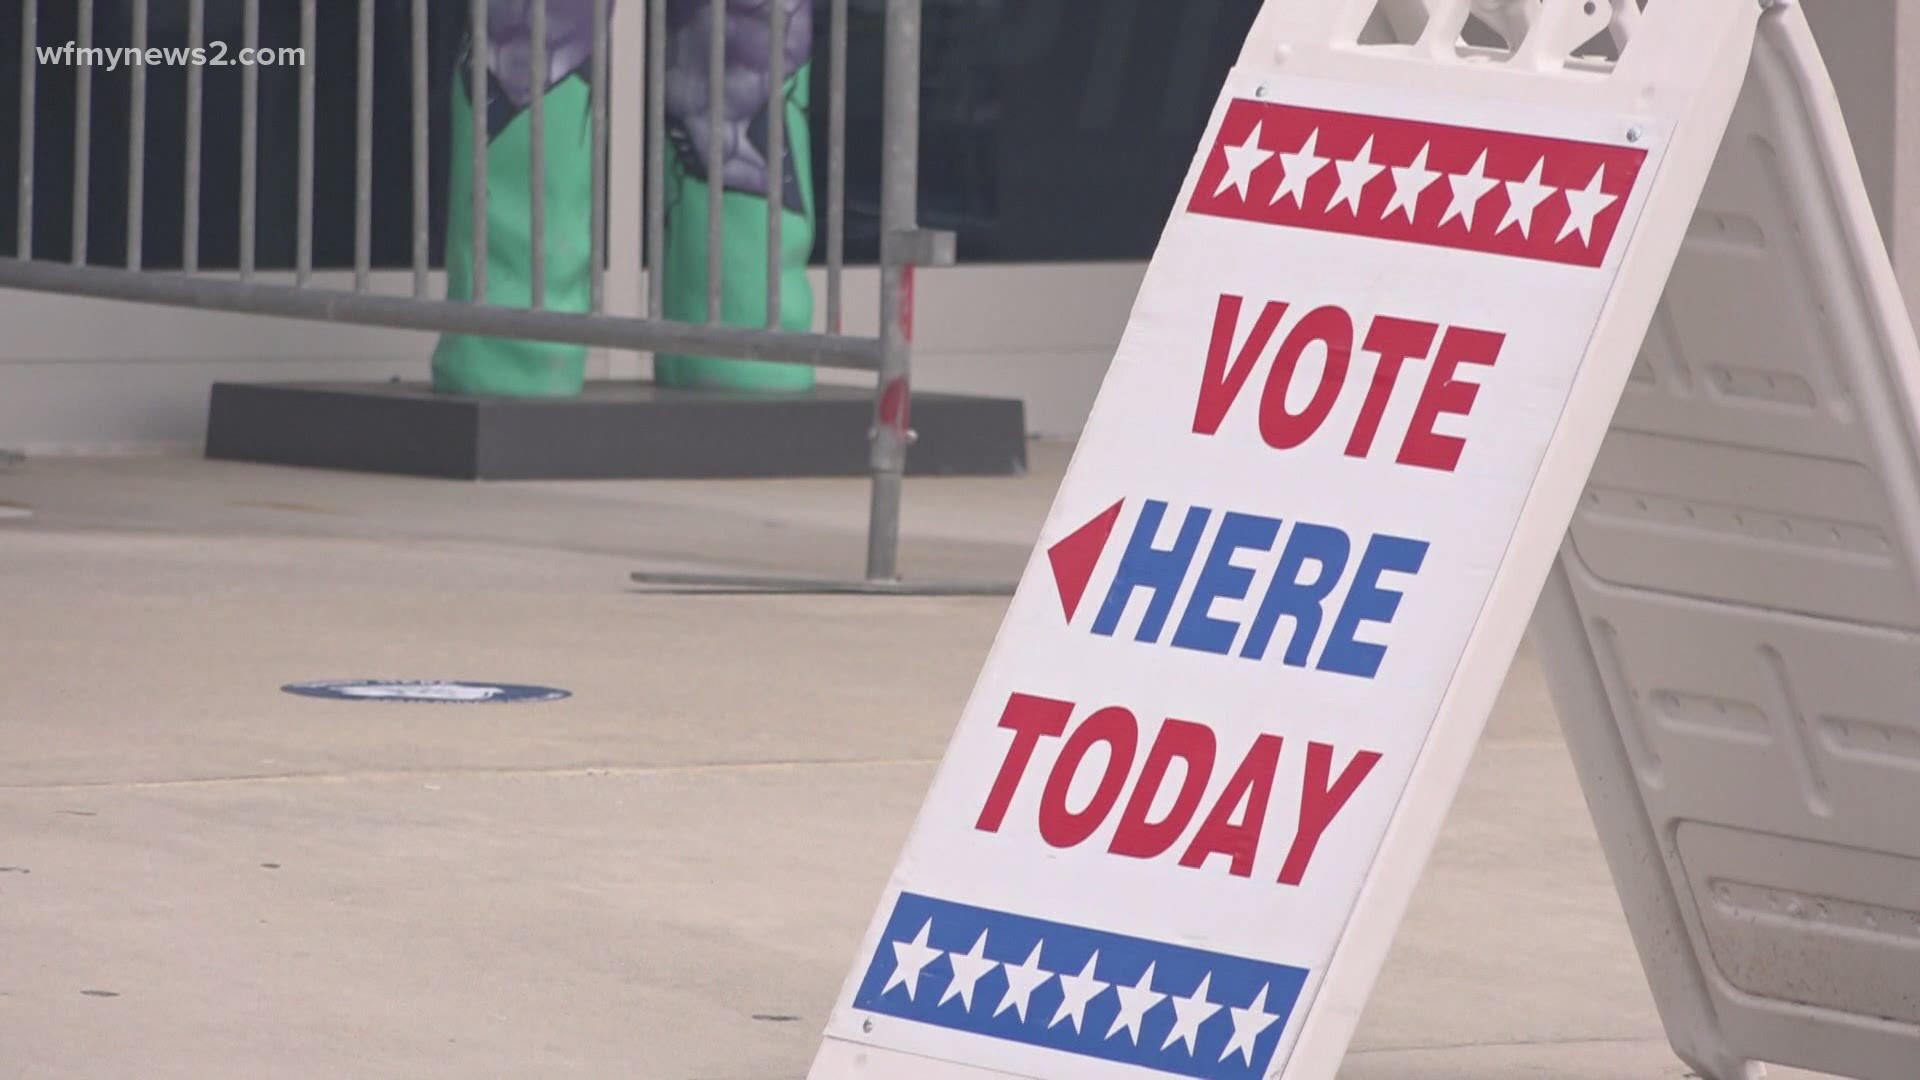 Early voting numbers are breaking records this election. Ben Briscoe breaks down where more voters are showing up early to cast their ballots, and why.